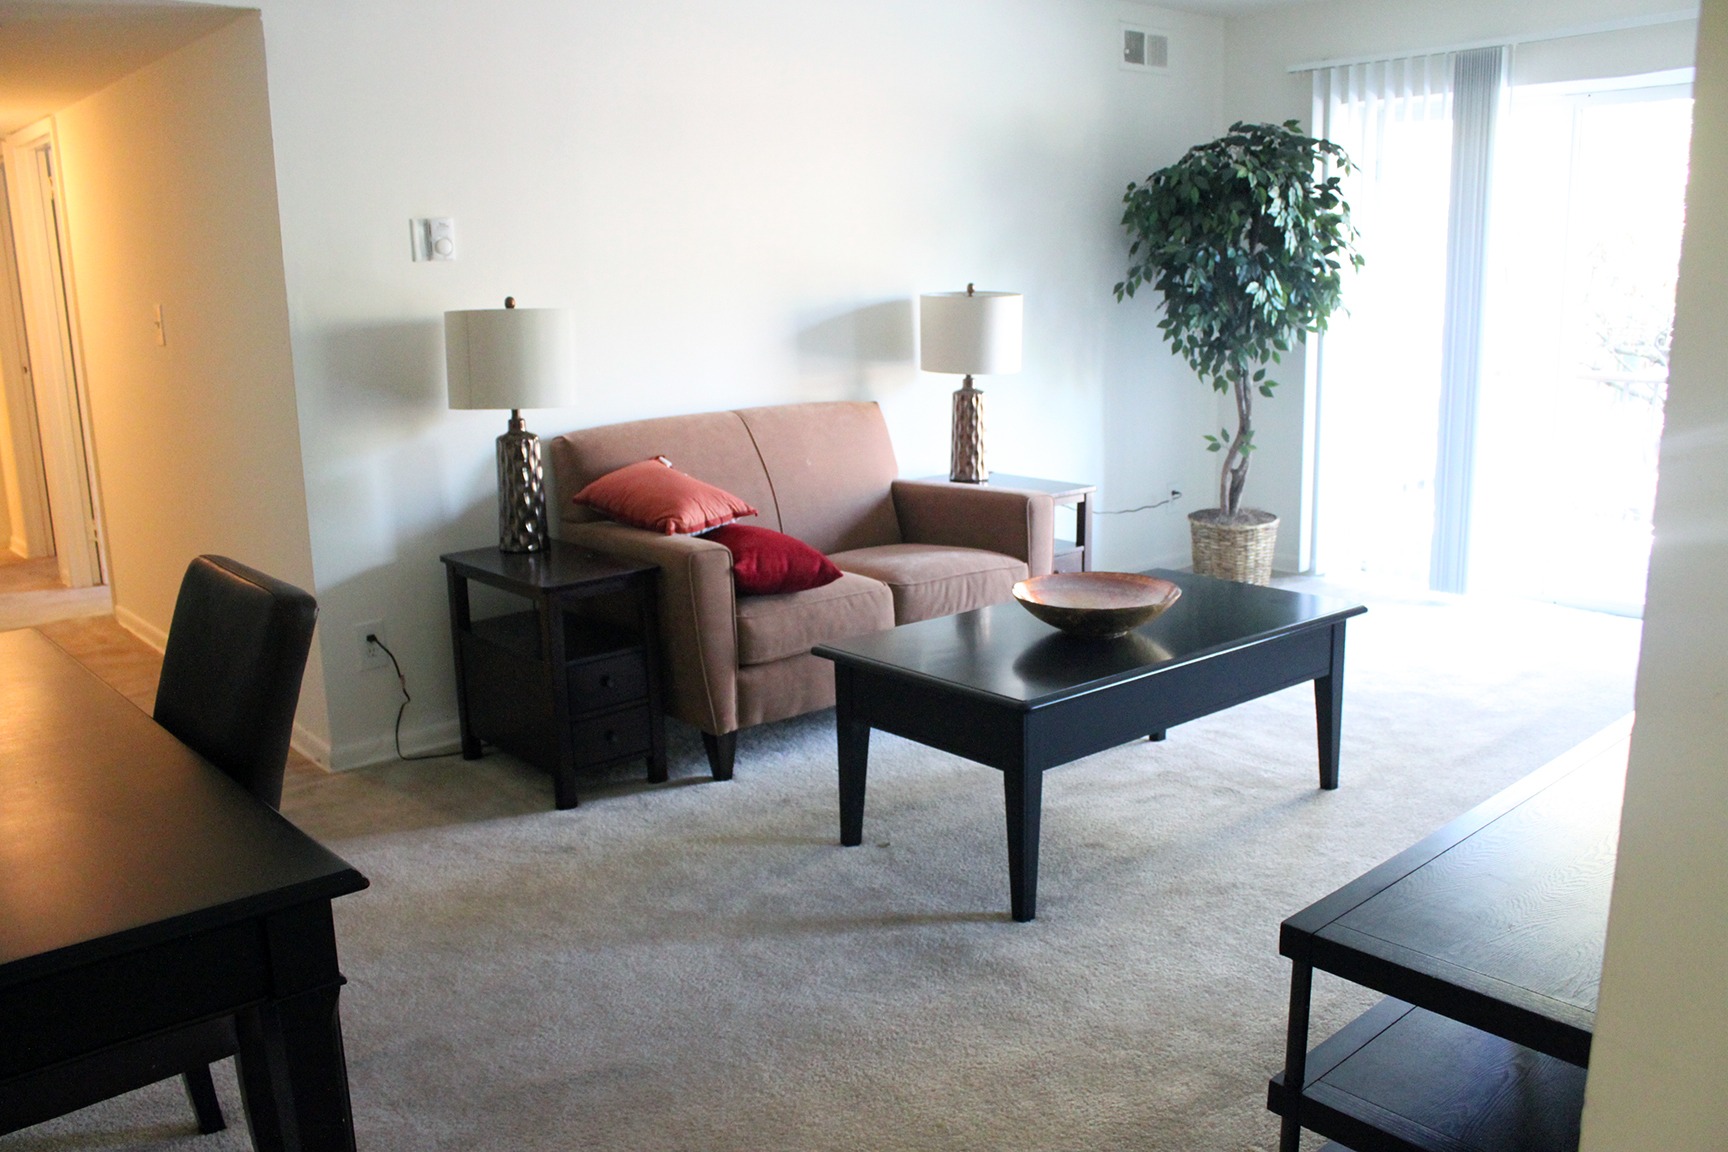 Living room area of an apartment, fitted with a couch, a coffee table, and a sliding door to patio area